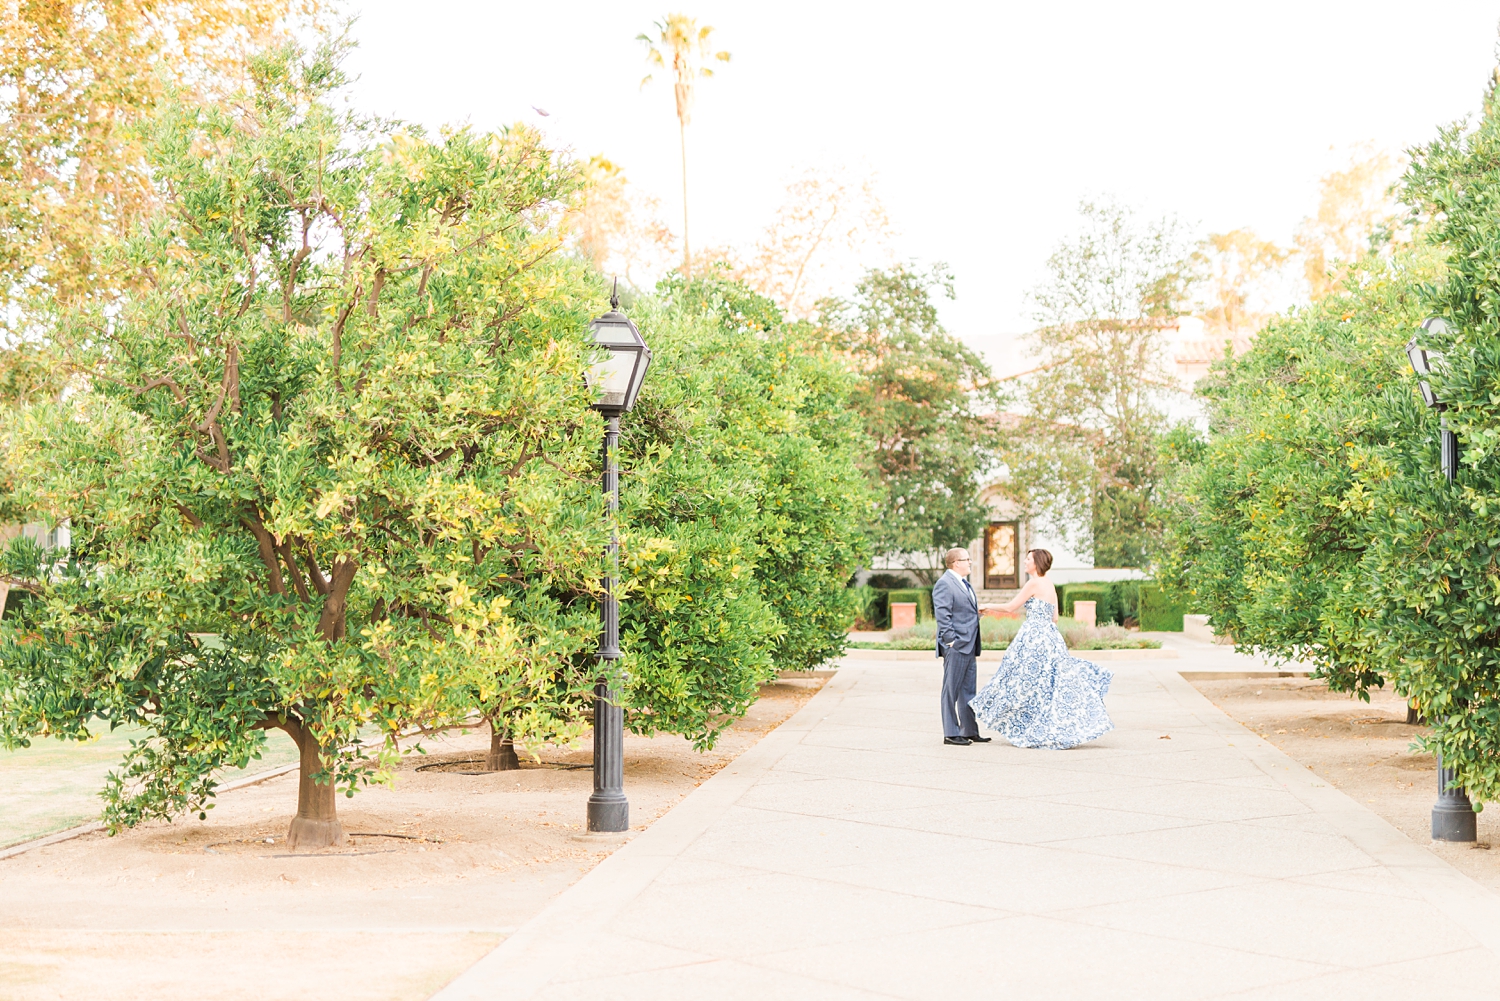 location ideas for engagement photos in southern california_0151.jpg